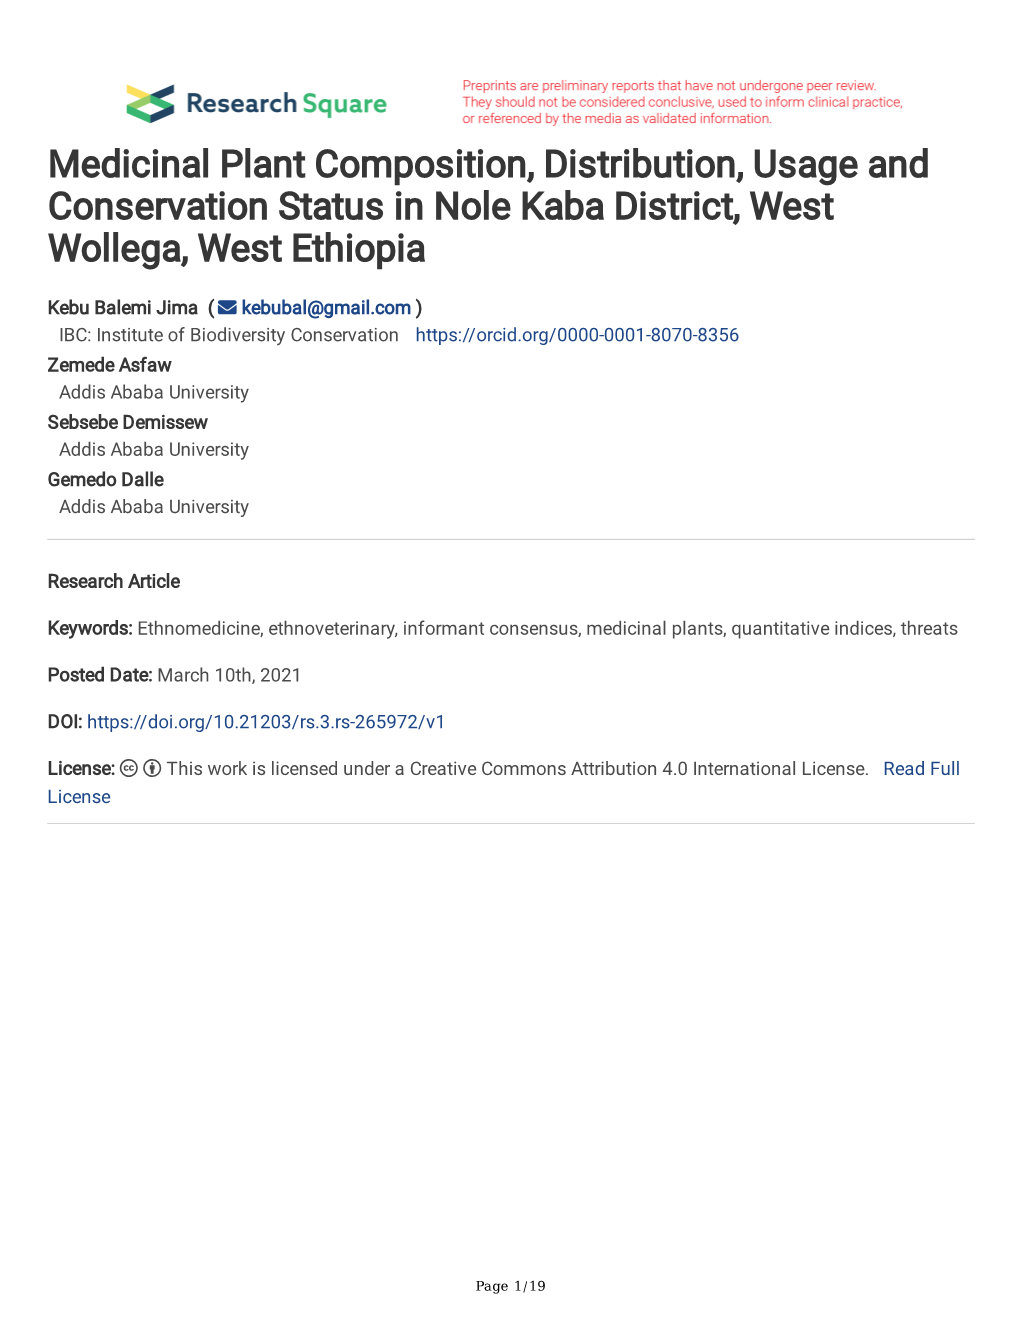 Medicinal Plant Composition, Distribution, Usage and Conservation Status in Nole Kaba District, West Wollega, West Ethiopia